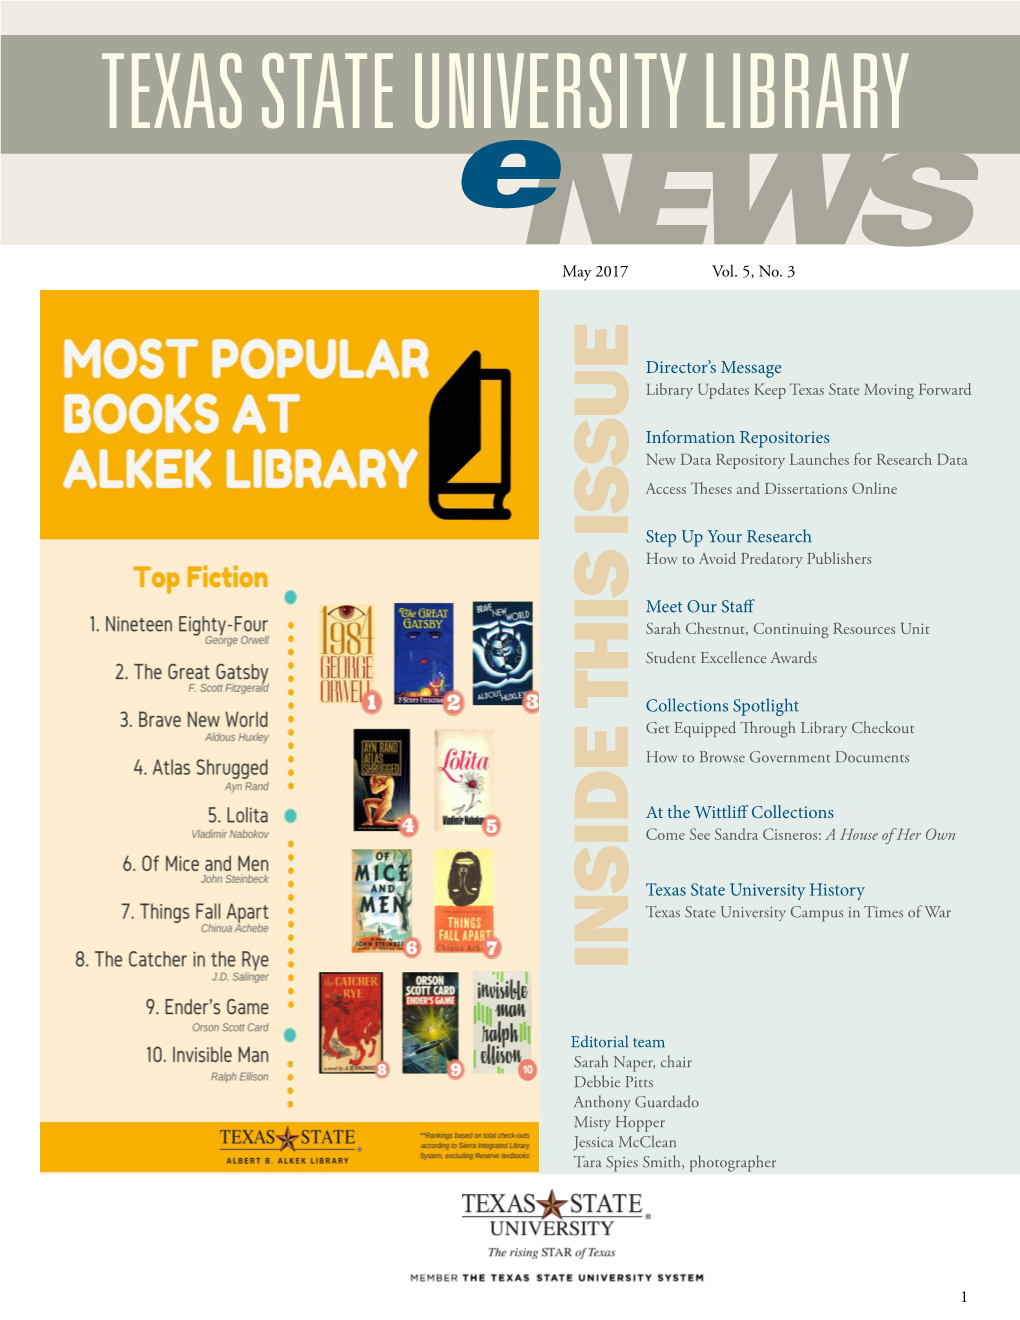 May 2017 University Library Newsletter